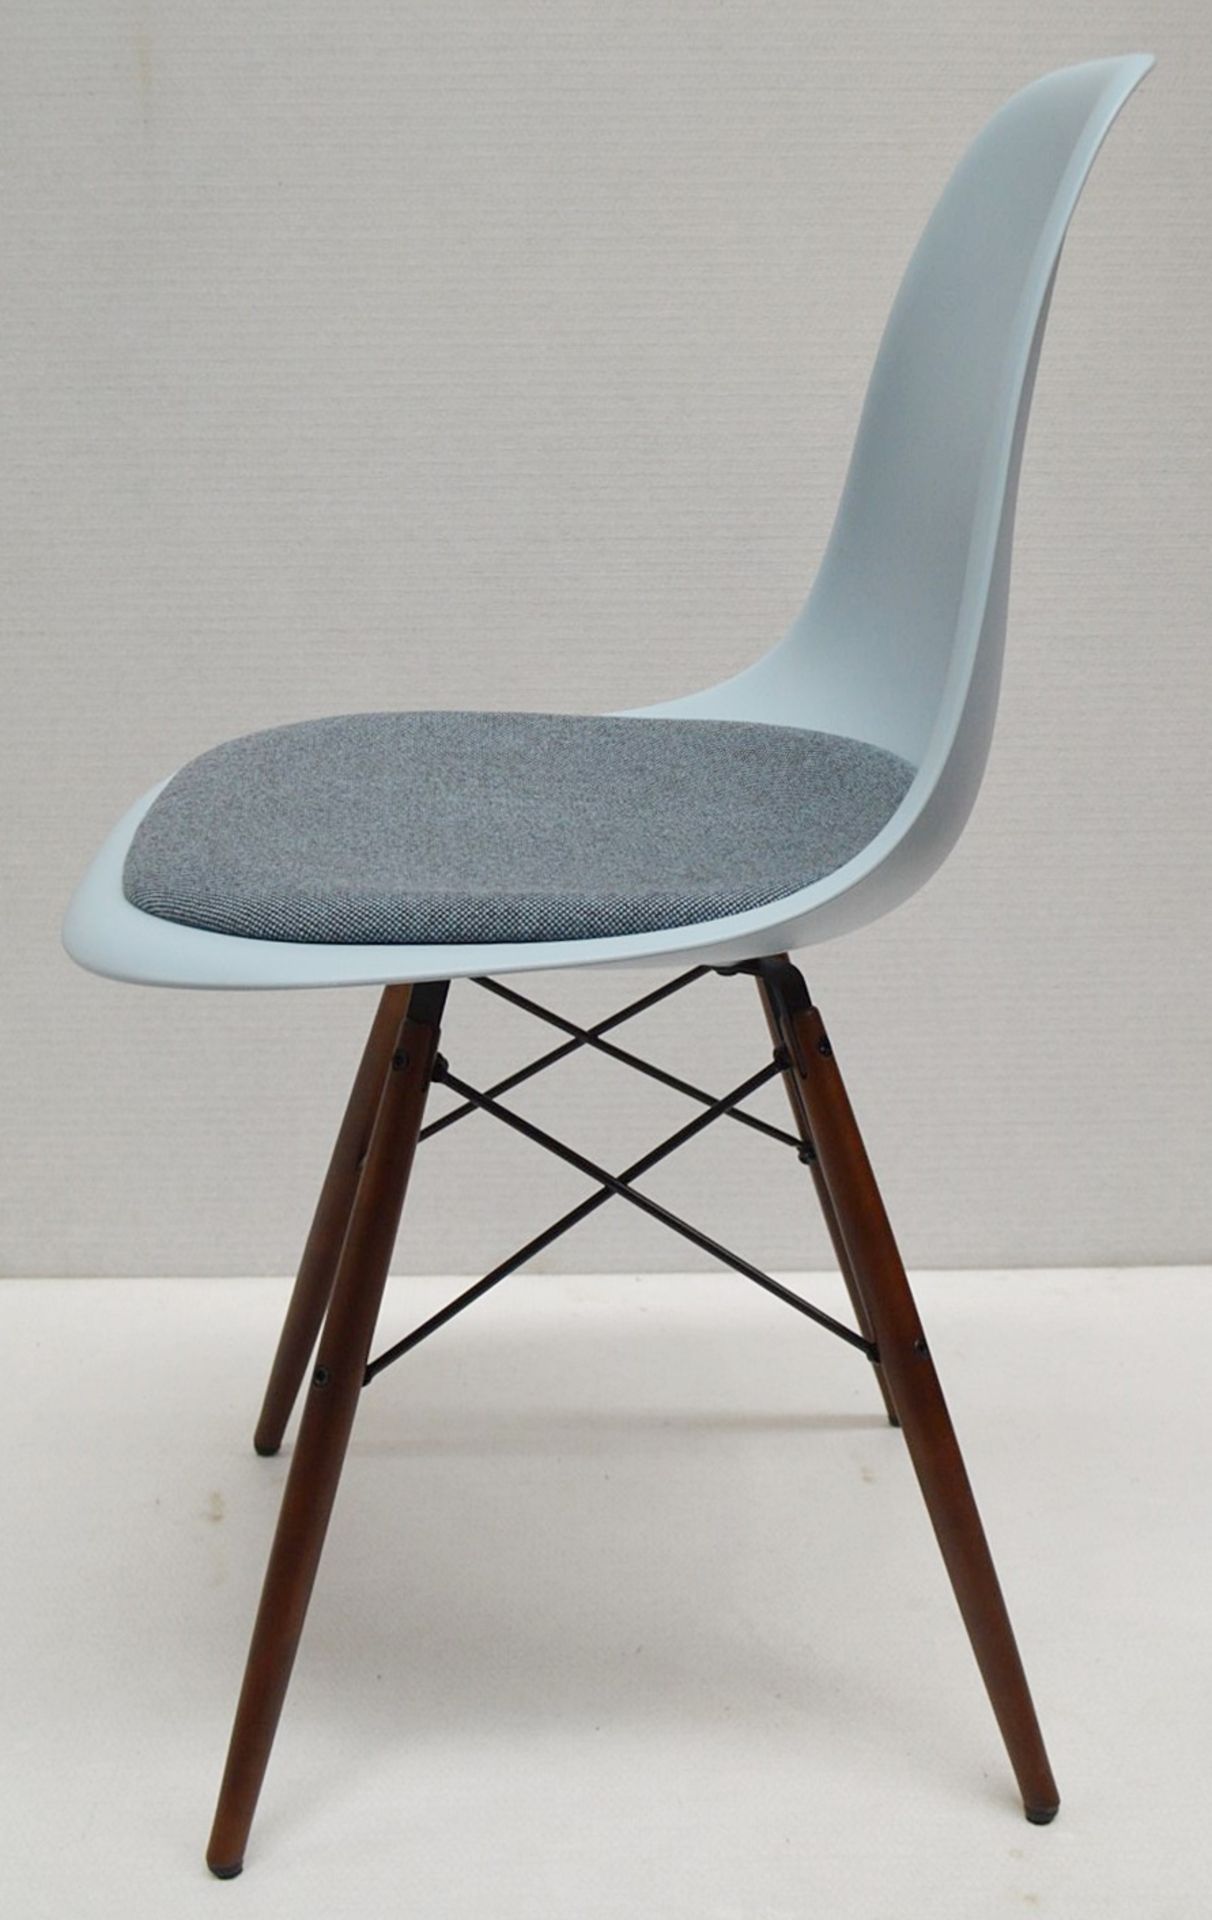 Set Of 4 x VITRA Eames DSW Designer Side Chairs With Upholsted Seats And Maple Bases In A Dark Stain - Image 7 of 11